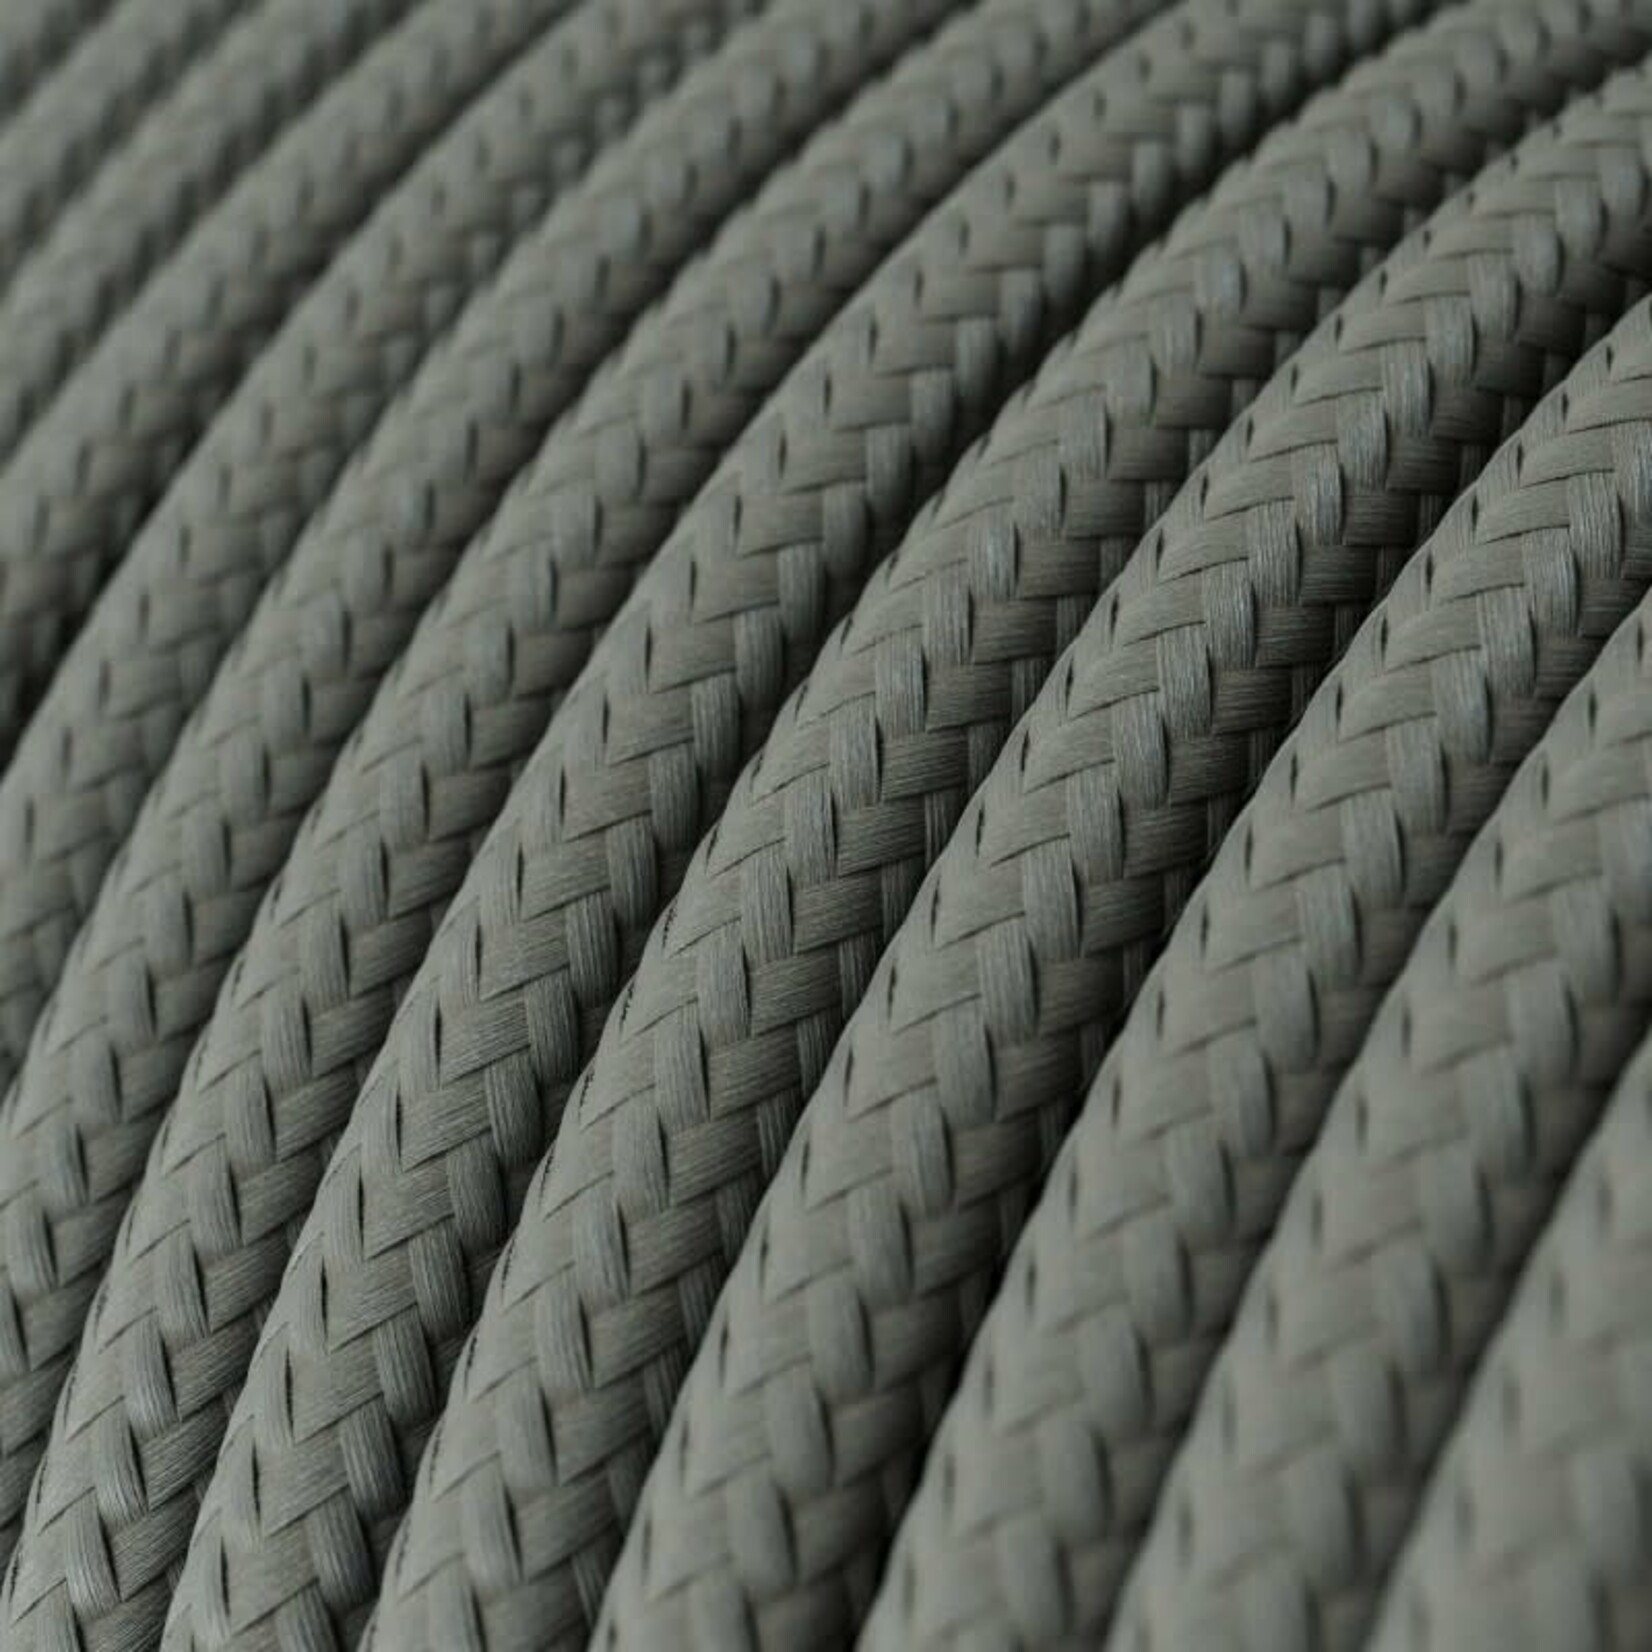 CCIT PER METRE Round Grey Electric Cable Flex covered by Rayon solid colour fabric